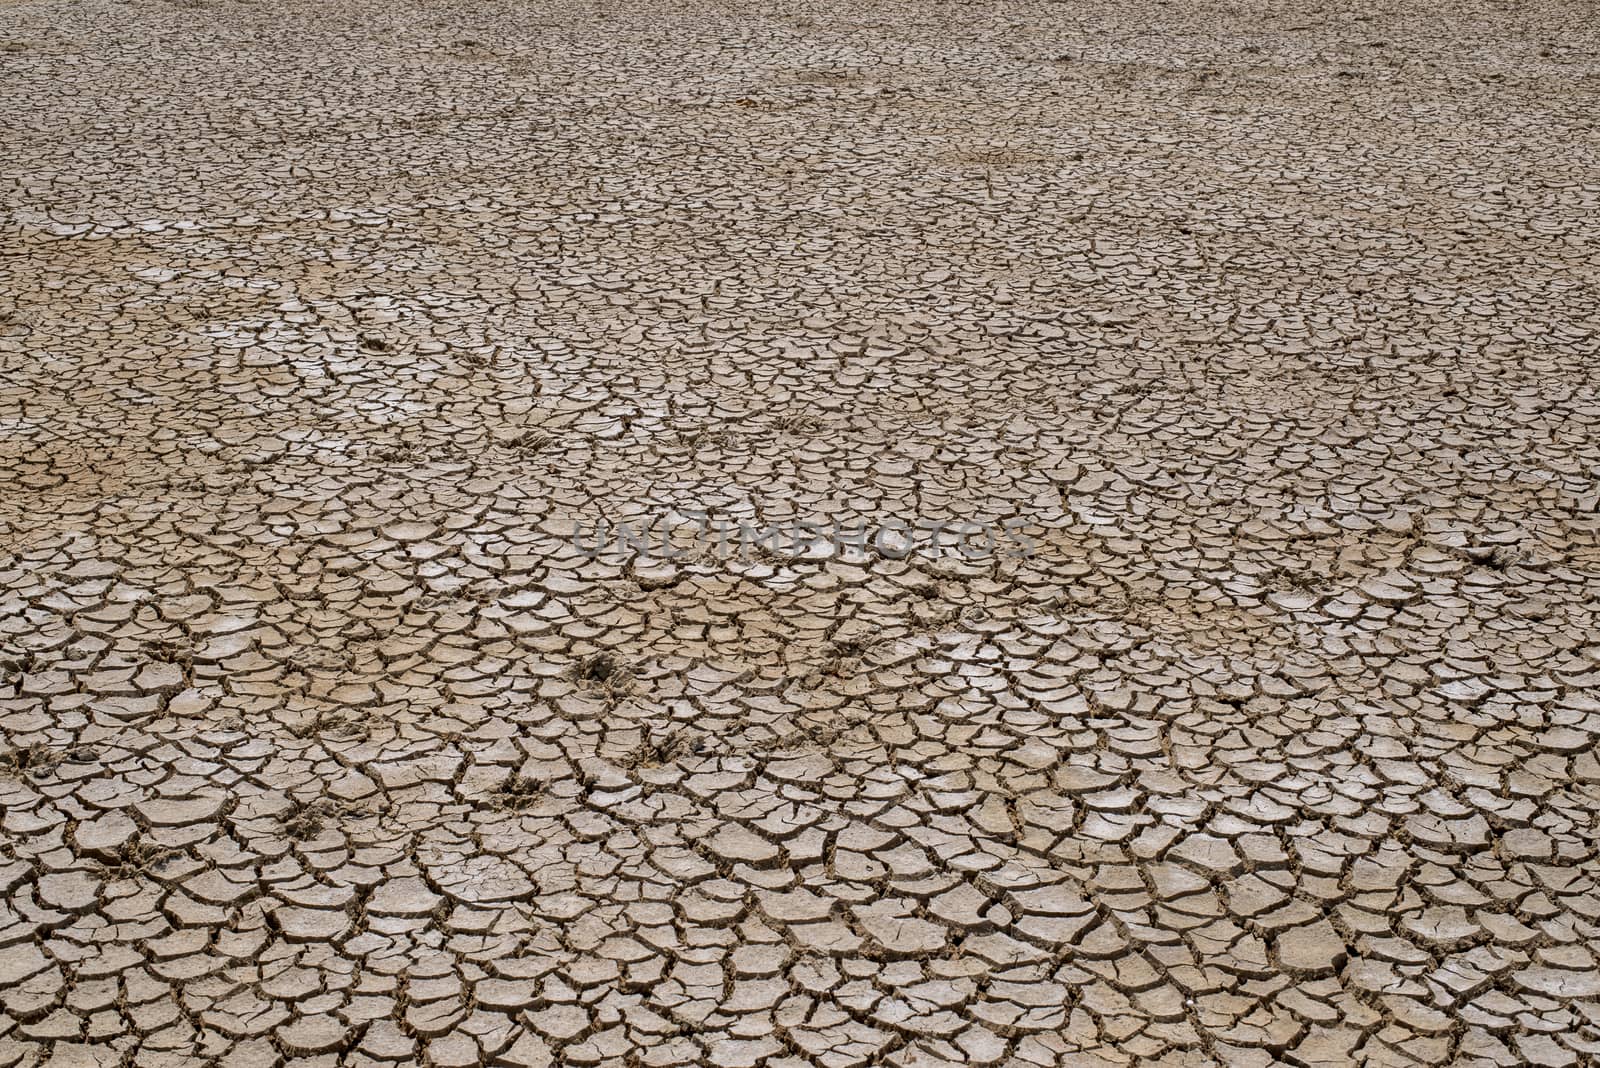 Crack soil on dry season, Global warming / cracked dried mud / D by chanwity